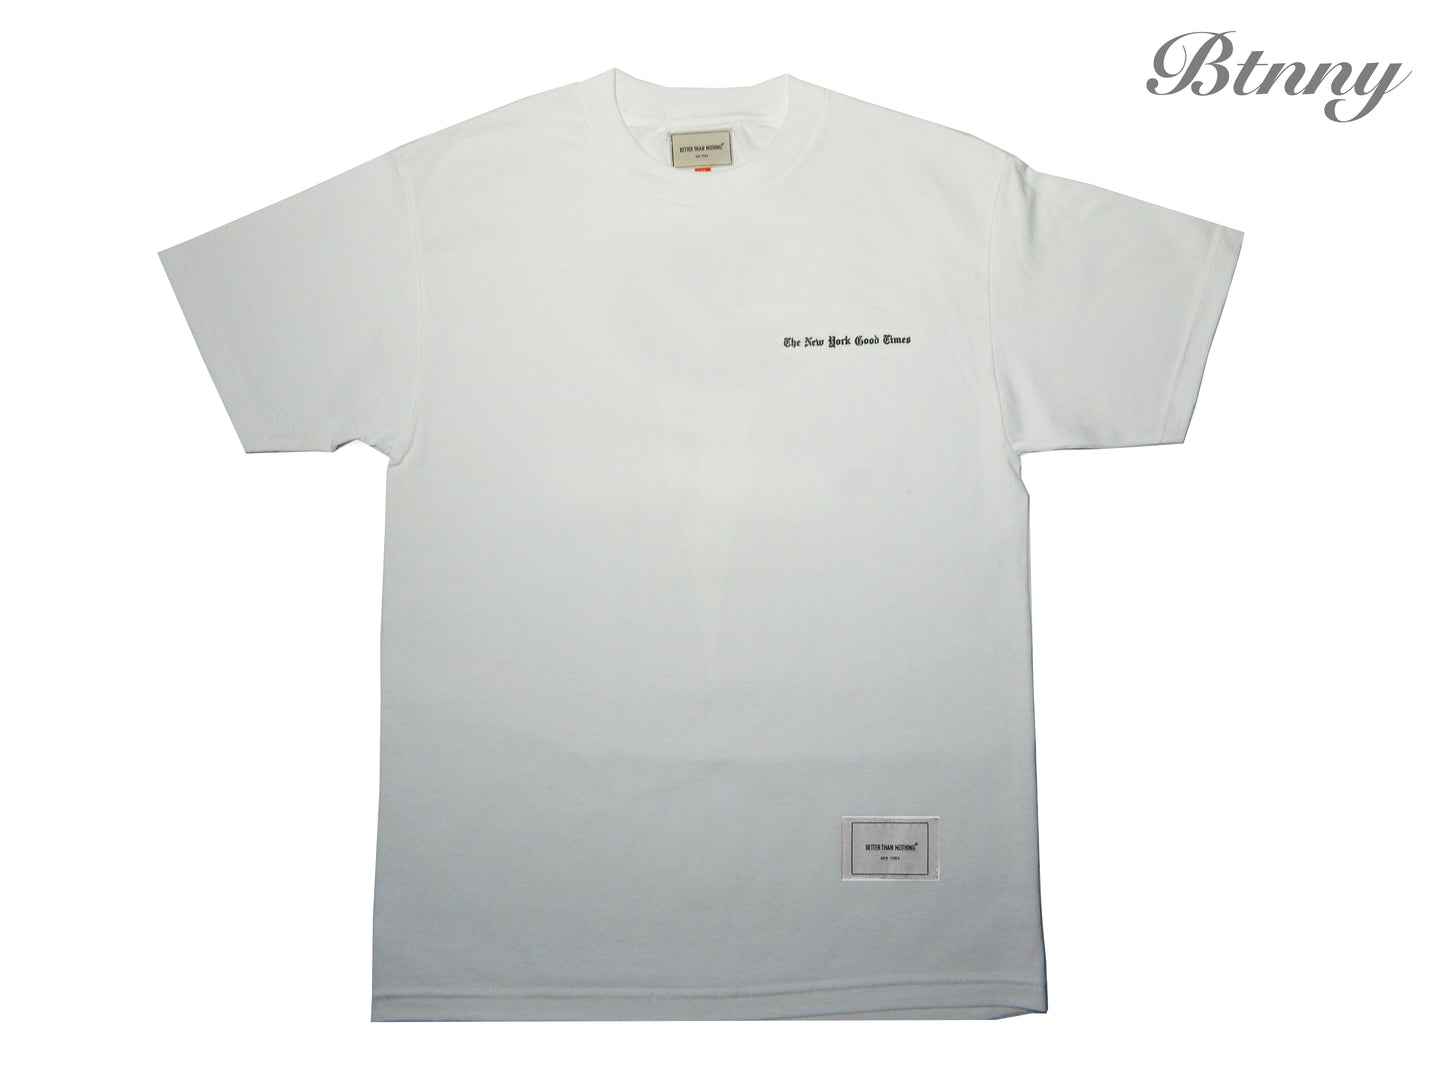 New York Good Times S/S T-Shirts